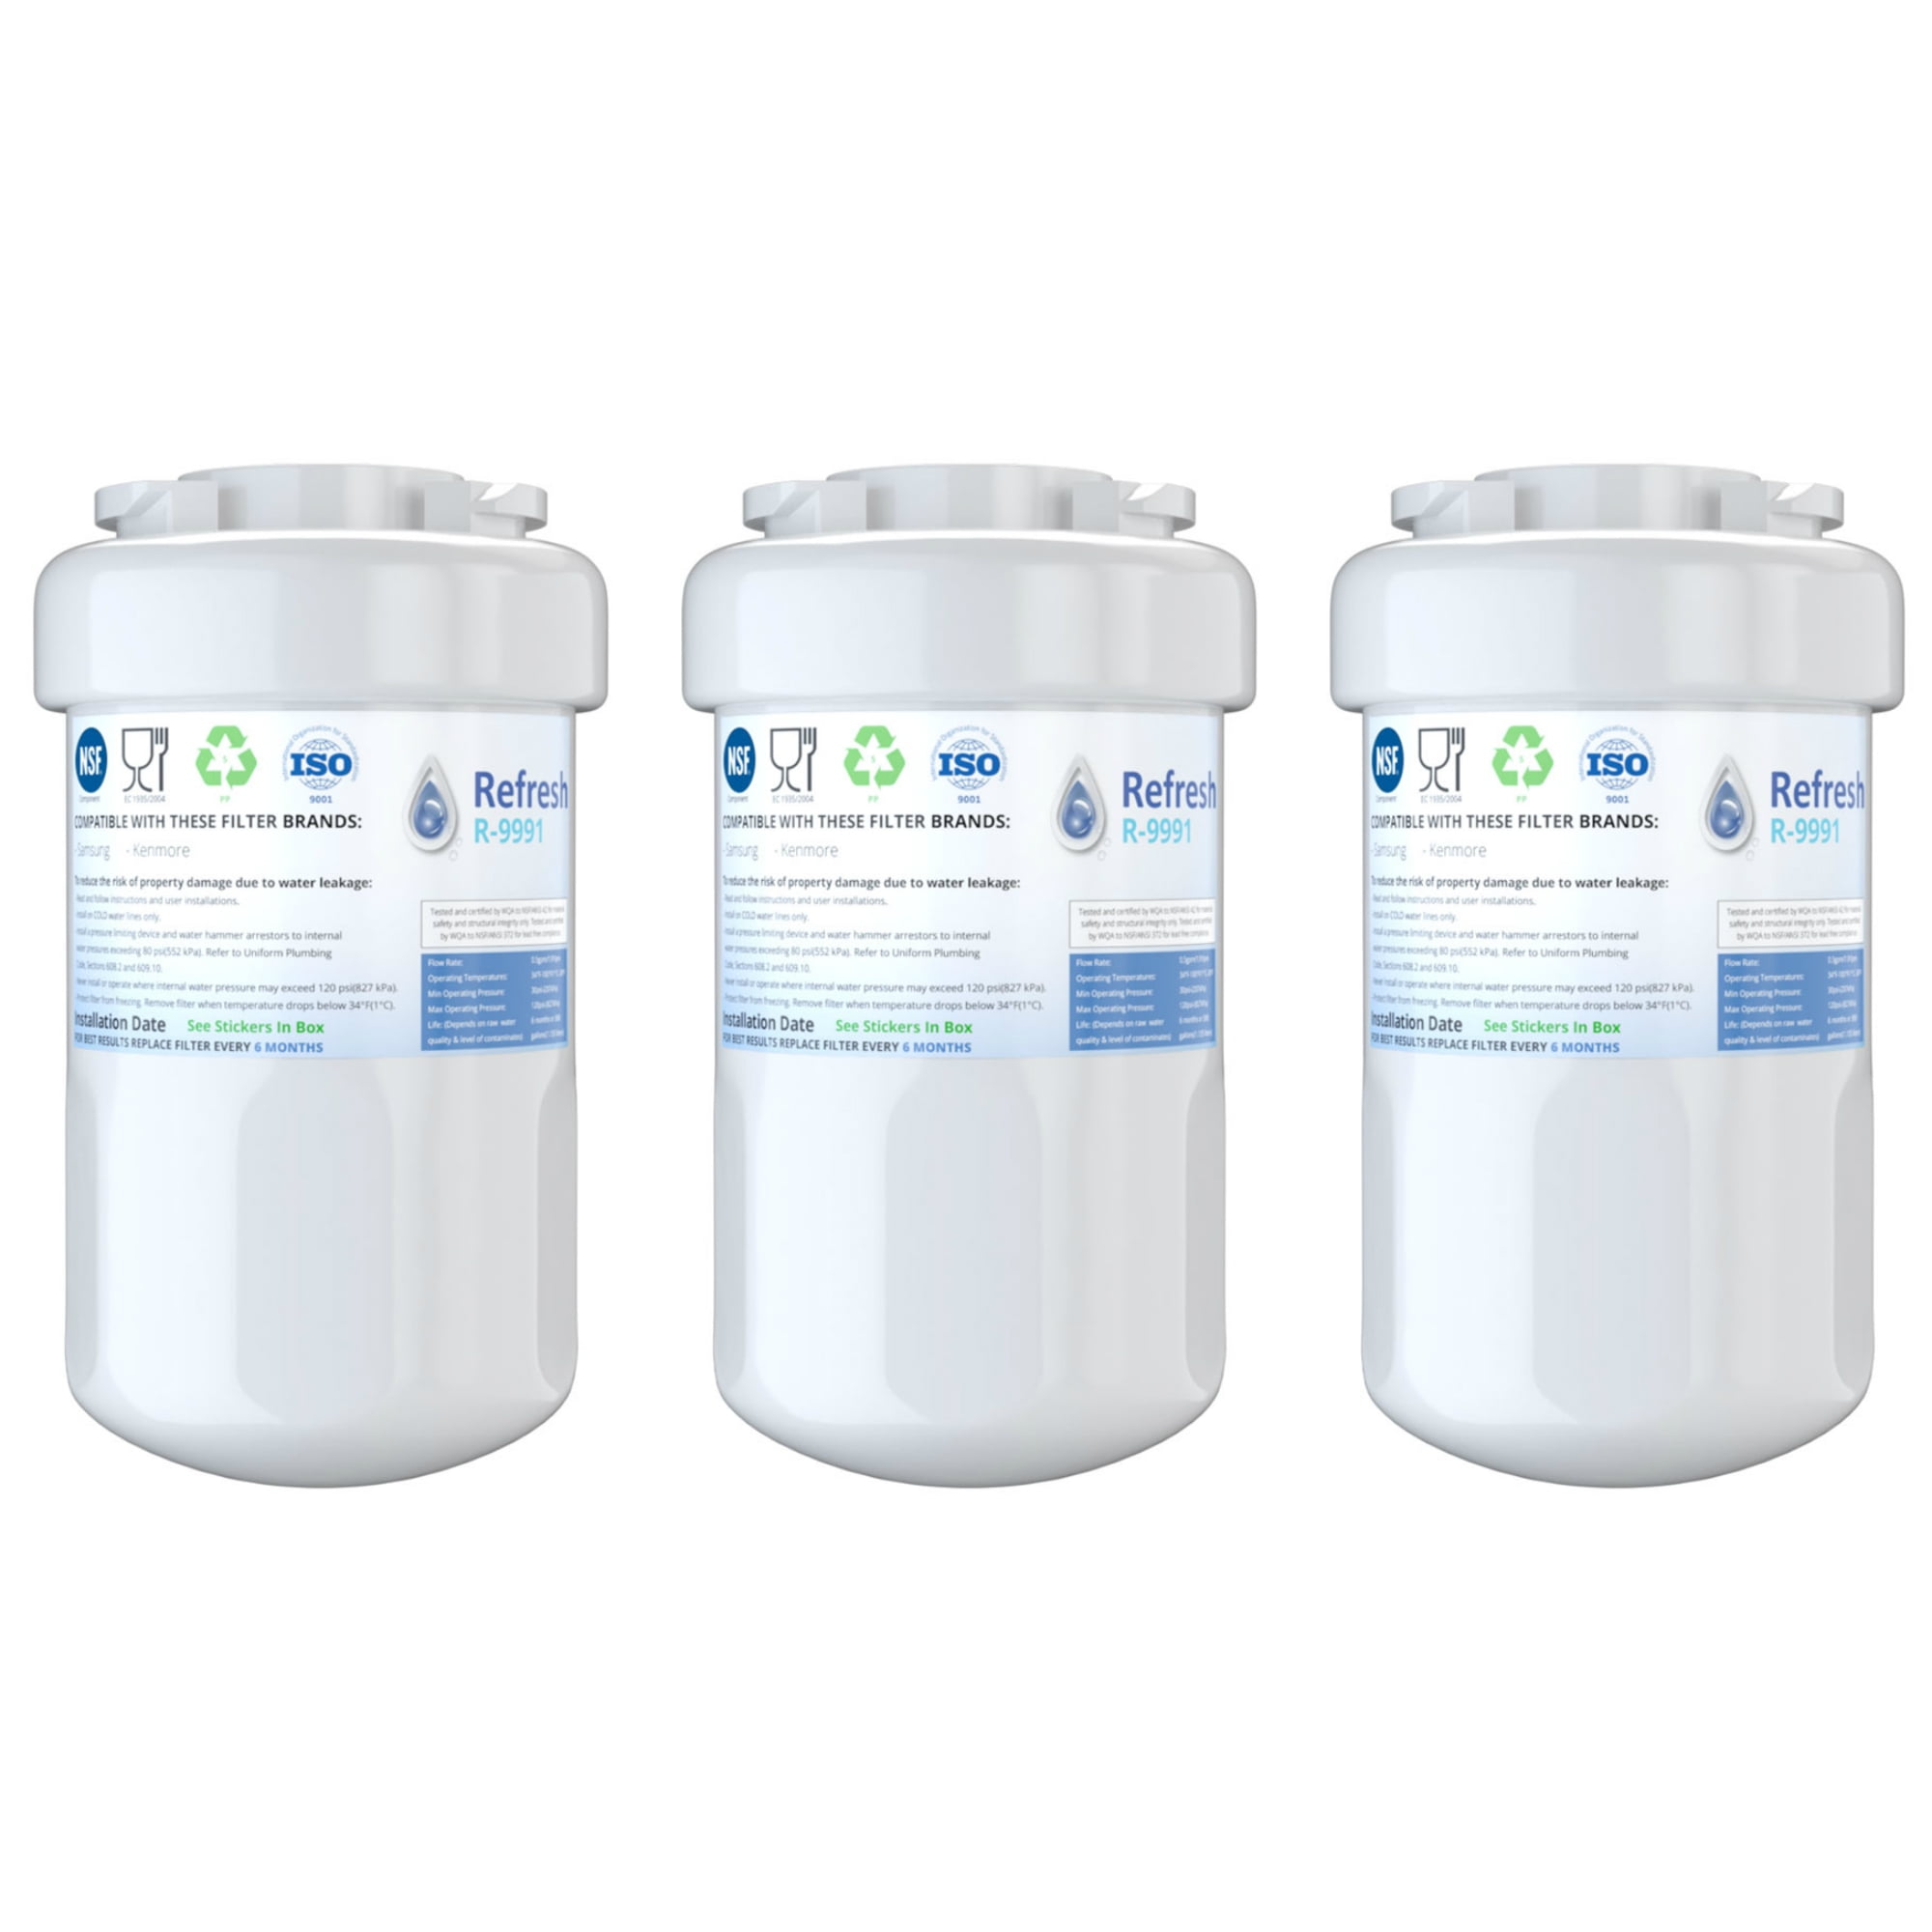 Refresh Replacement Water Filter 6 Pack Fits GE WF277 Refrigerators 